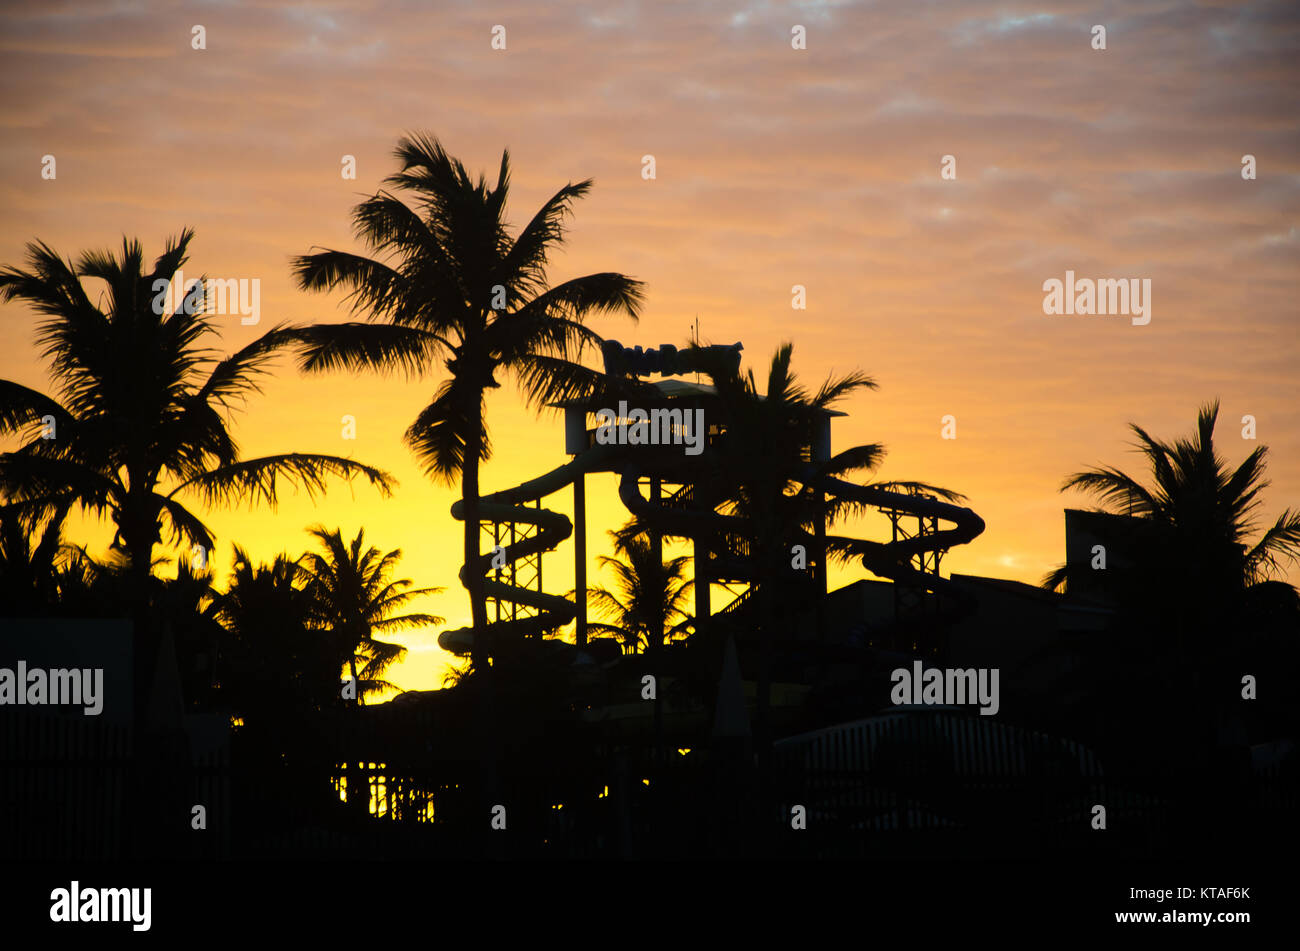 Fortaleza, Brazil, jul 8, 2017: Sunset golden hour with colored sky,  palm trees and aquatic park as background Stock Photo